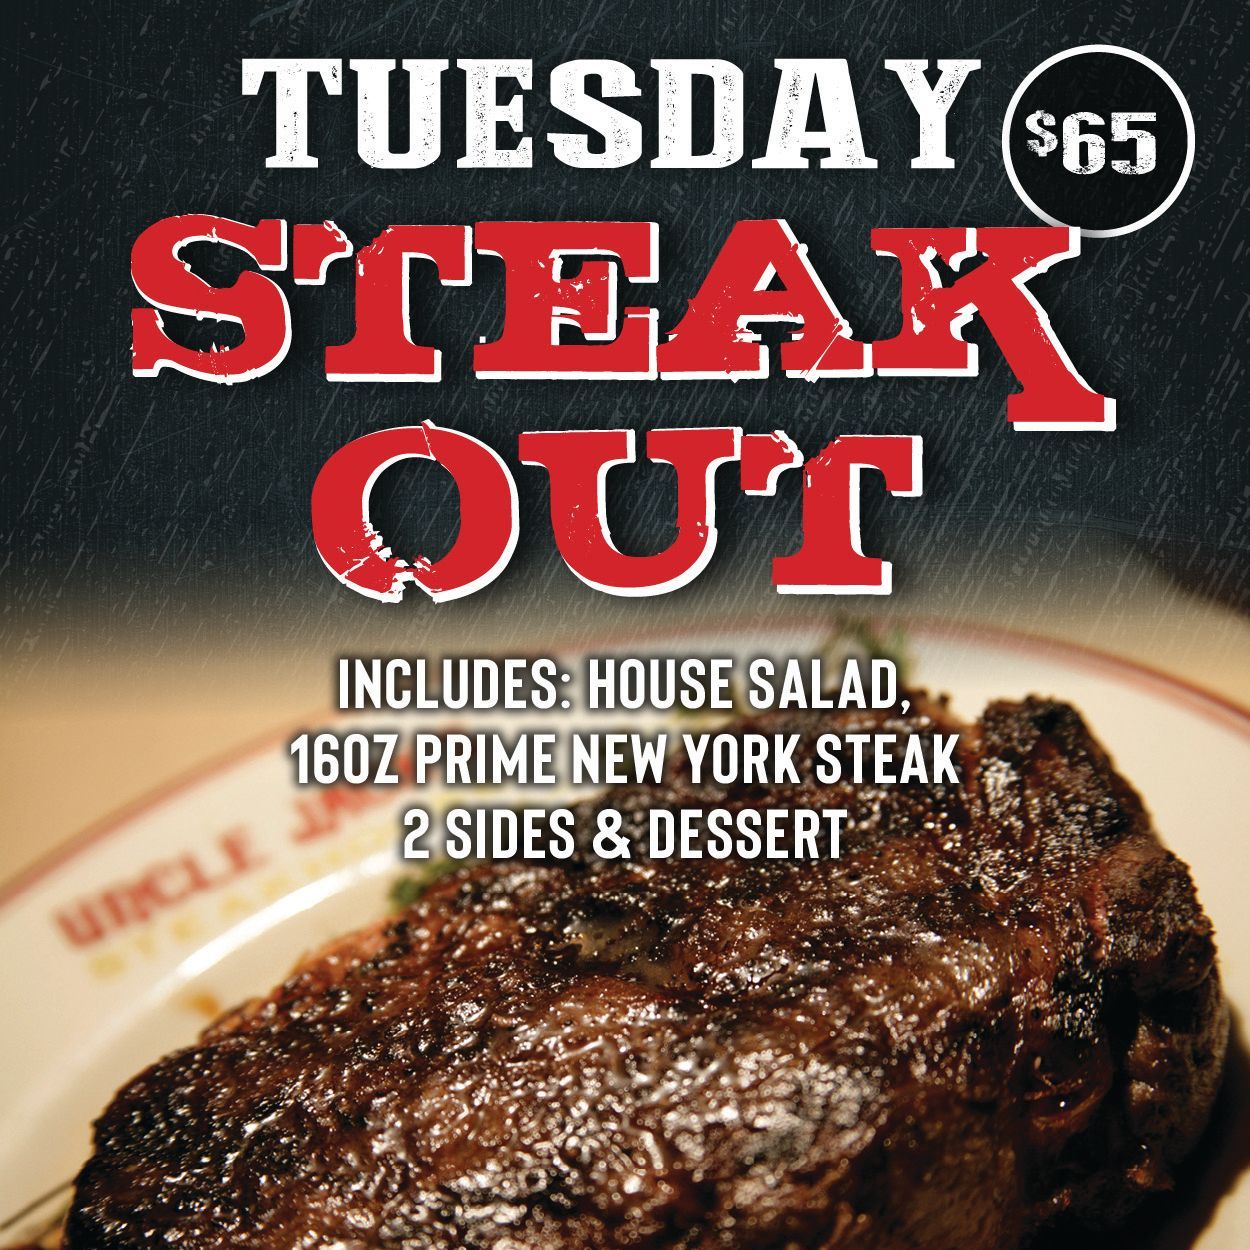 A poster for tuesday steak out includes house salad and prime new york steak